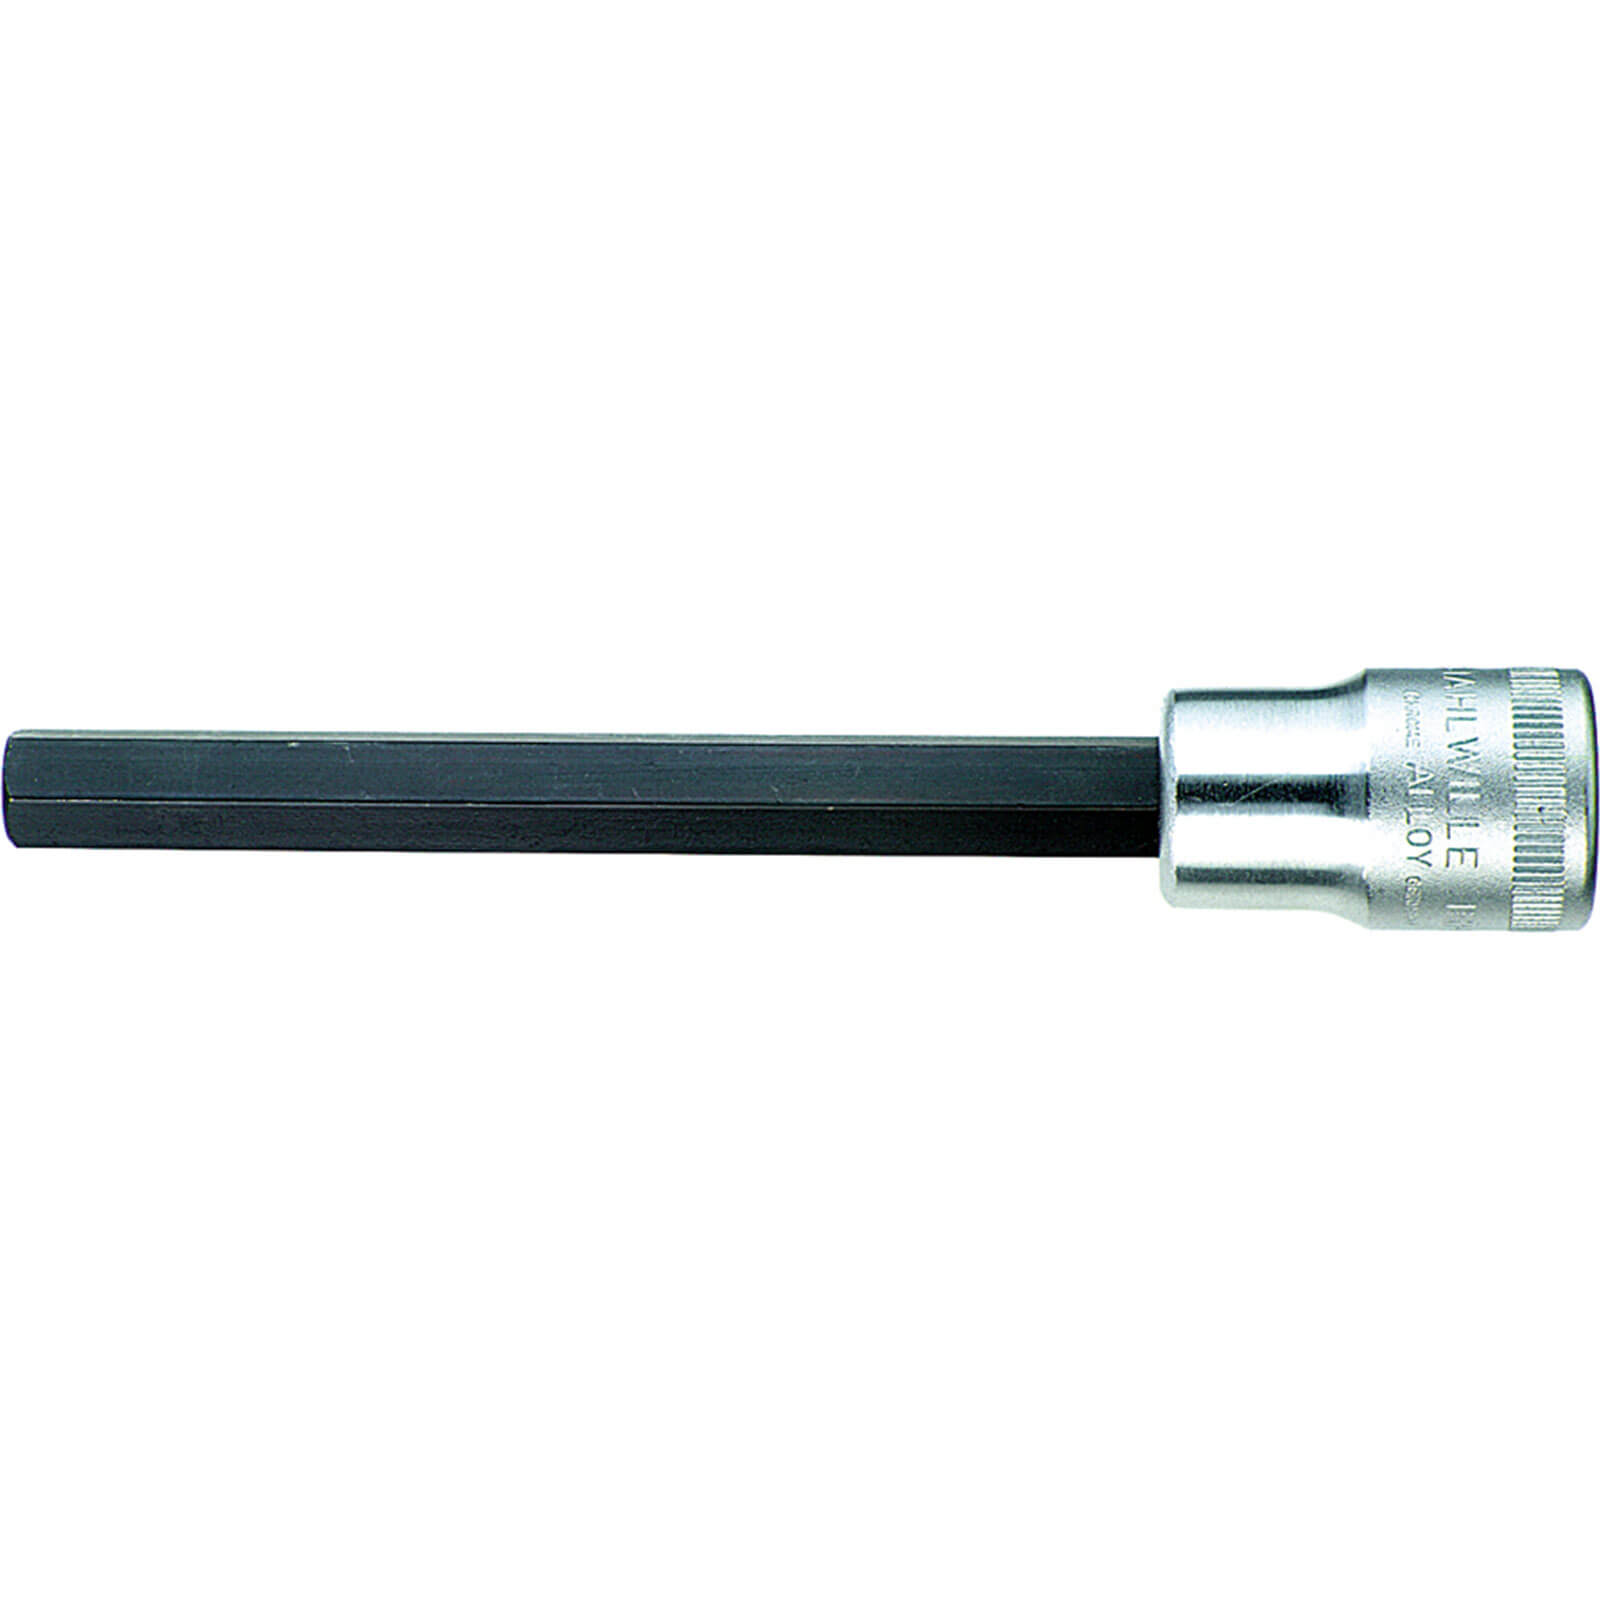 Image of Stahlwille 1/2" Drive Extra Long Hexagon Socket Bit 1/2" 14mm